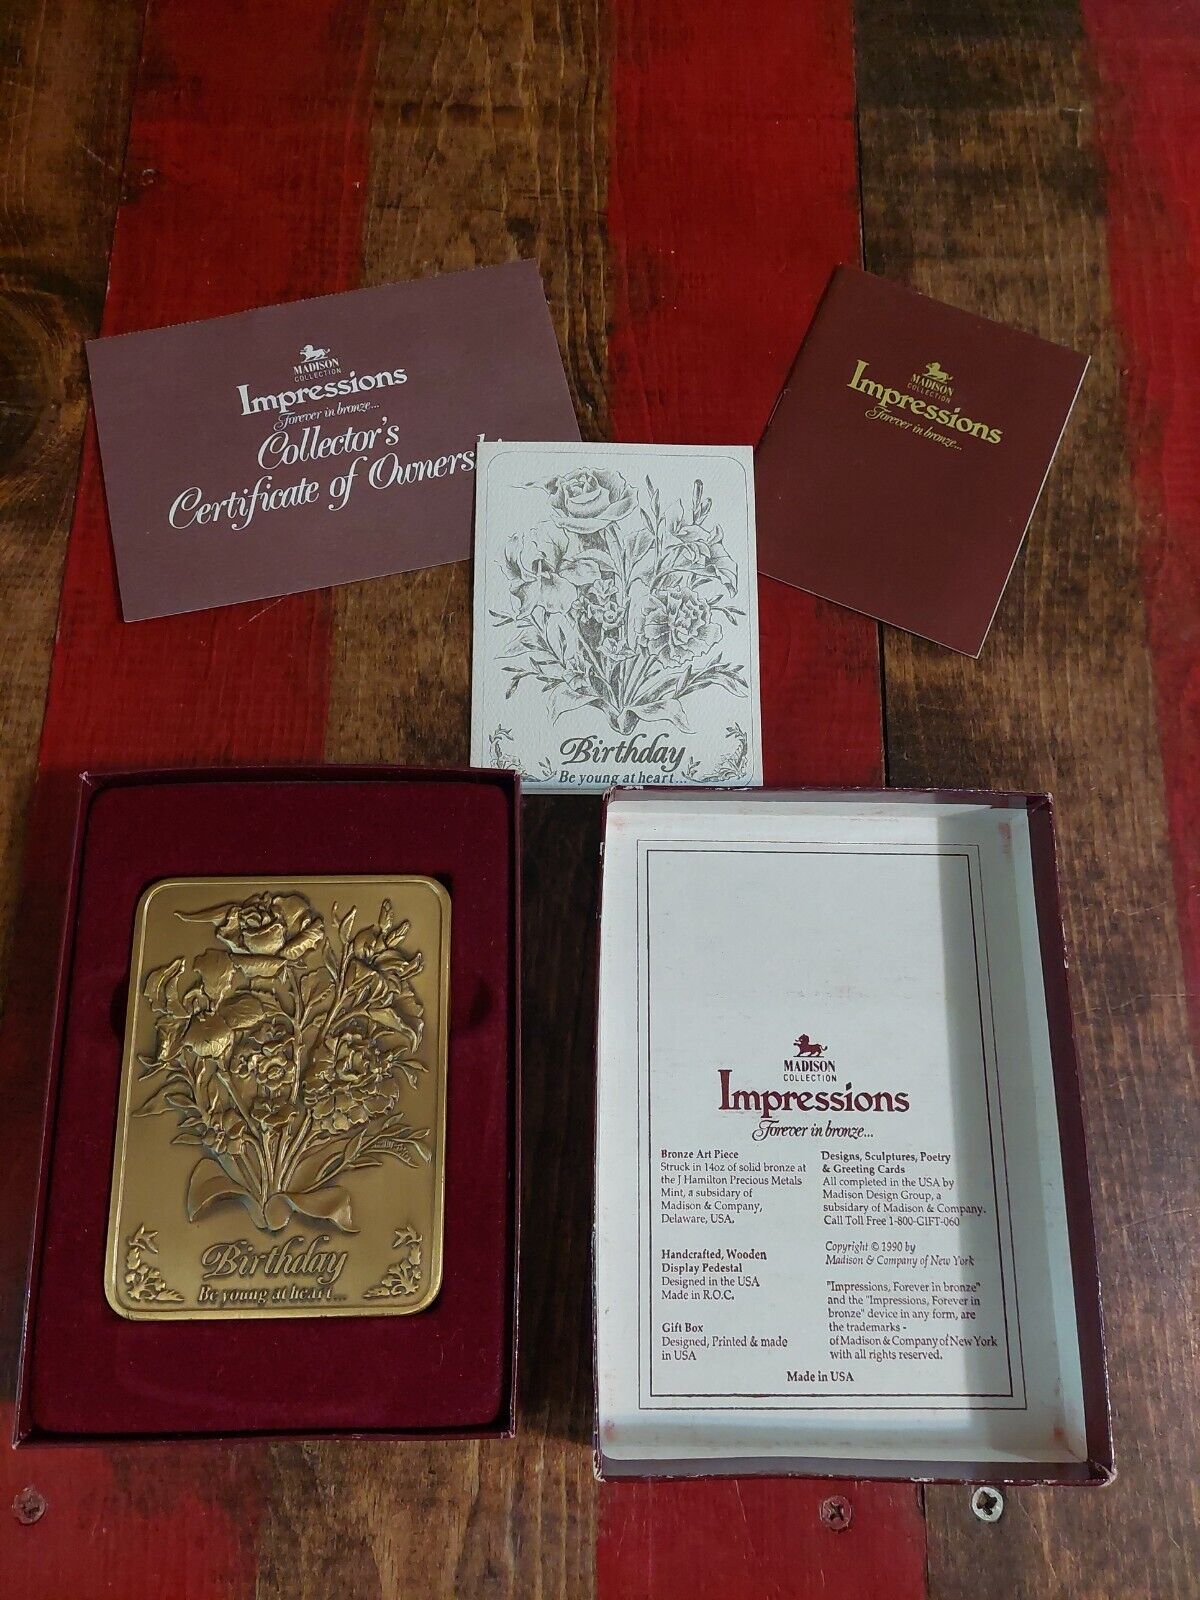 BIRTHDAY MADISON COLLECTION IMPRESSIONS 1990 FOREVER IN BRONZE ORIGINAL PACKAGE